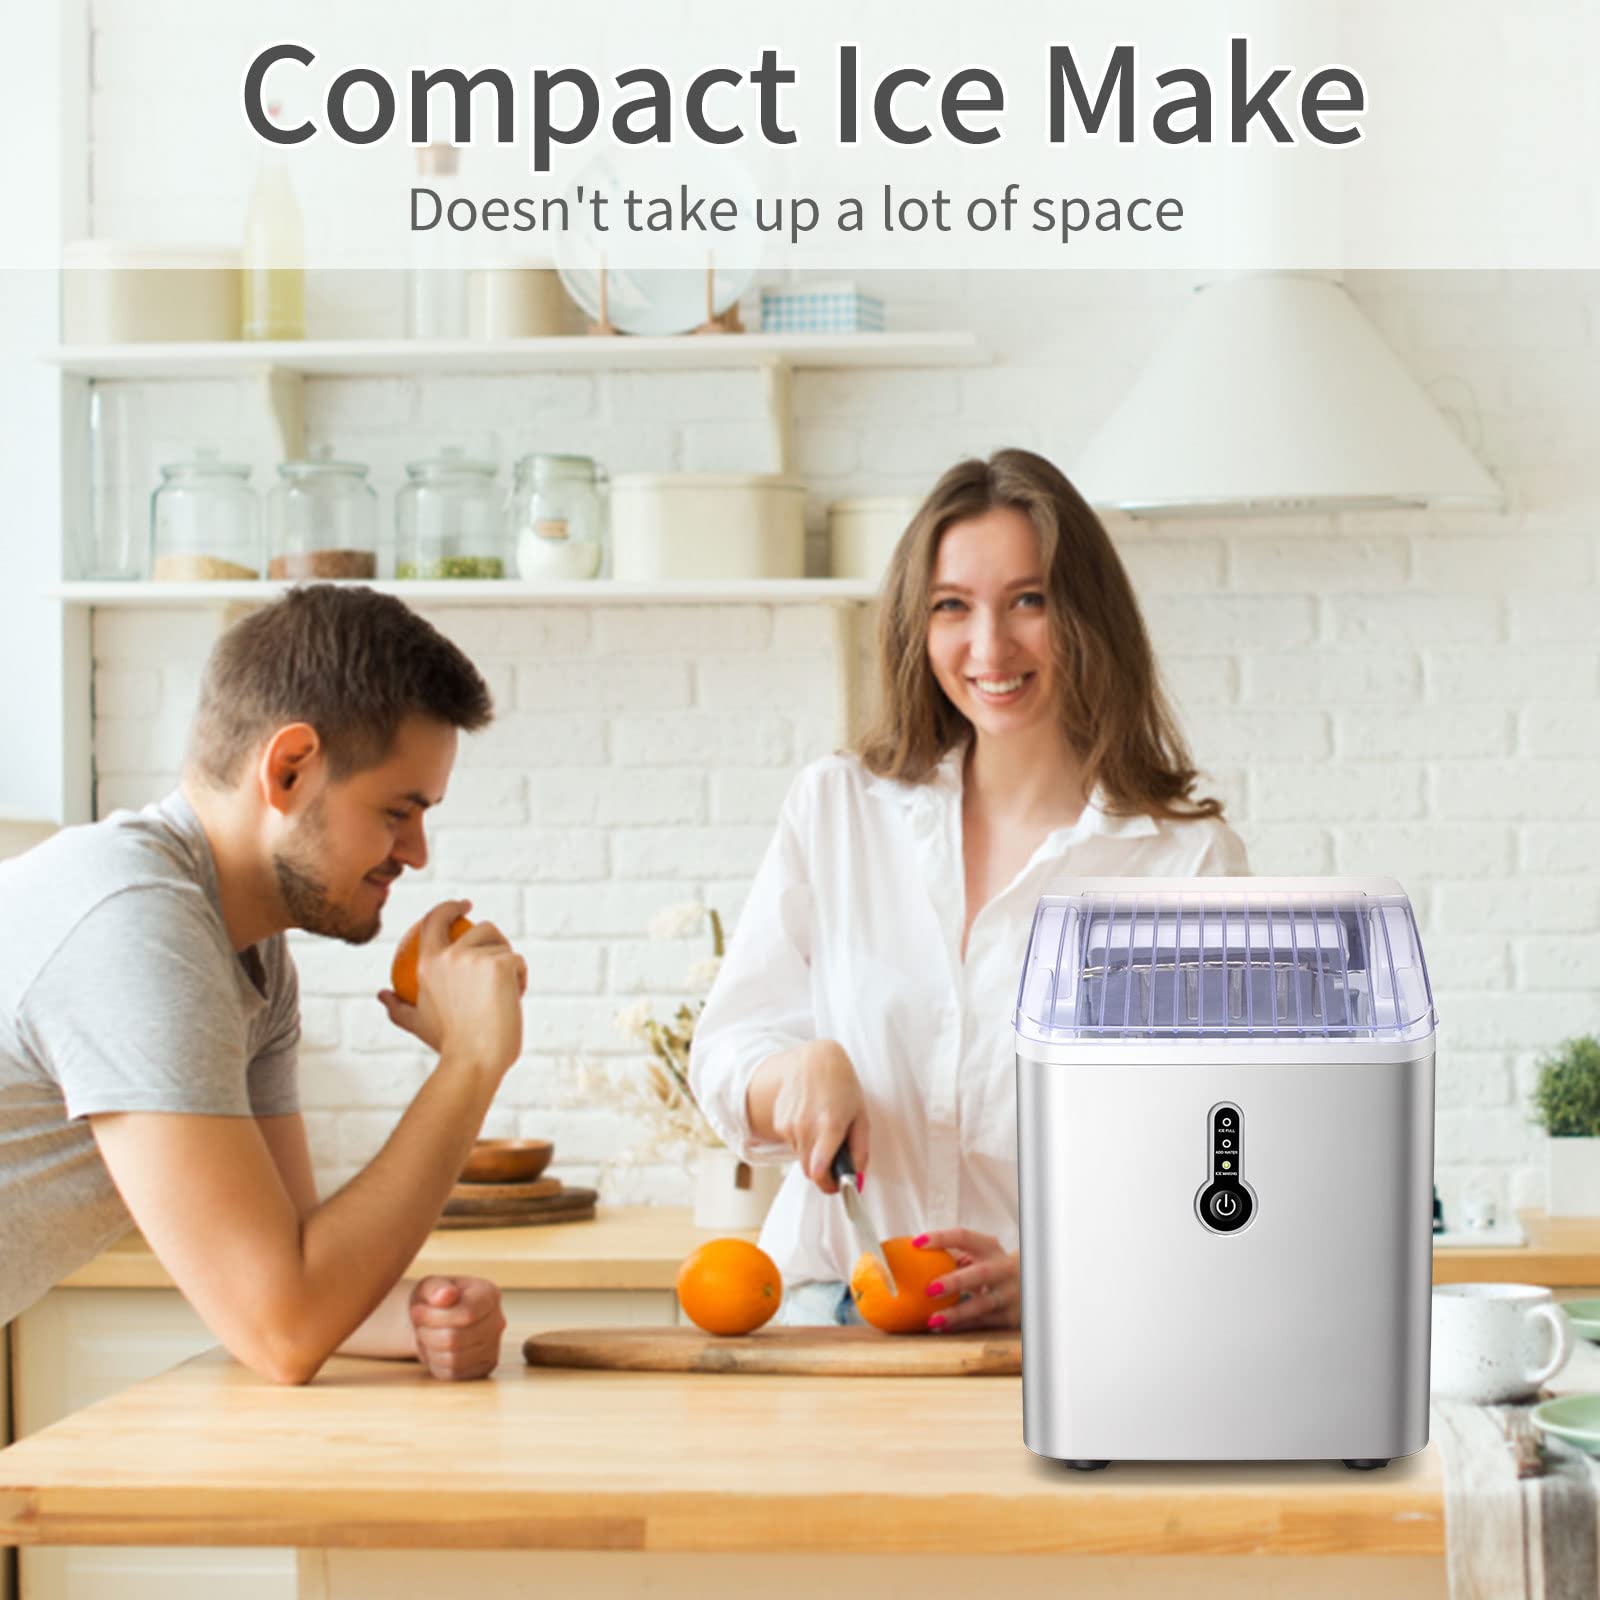  Antarctic Star Countertop Ice Maker Portable Ice Machine,  Basket Handle,Self-Cleaning Ice Makers, 26Lbs/24H, 9 Ice Cubes Ready in 6  Mins, S/L ice, for Home Kitchen Bar Party (Black) : Appliances